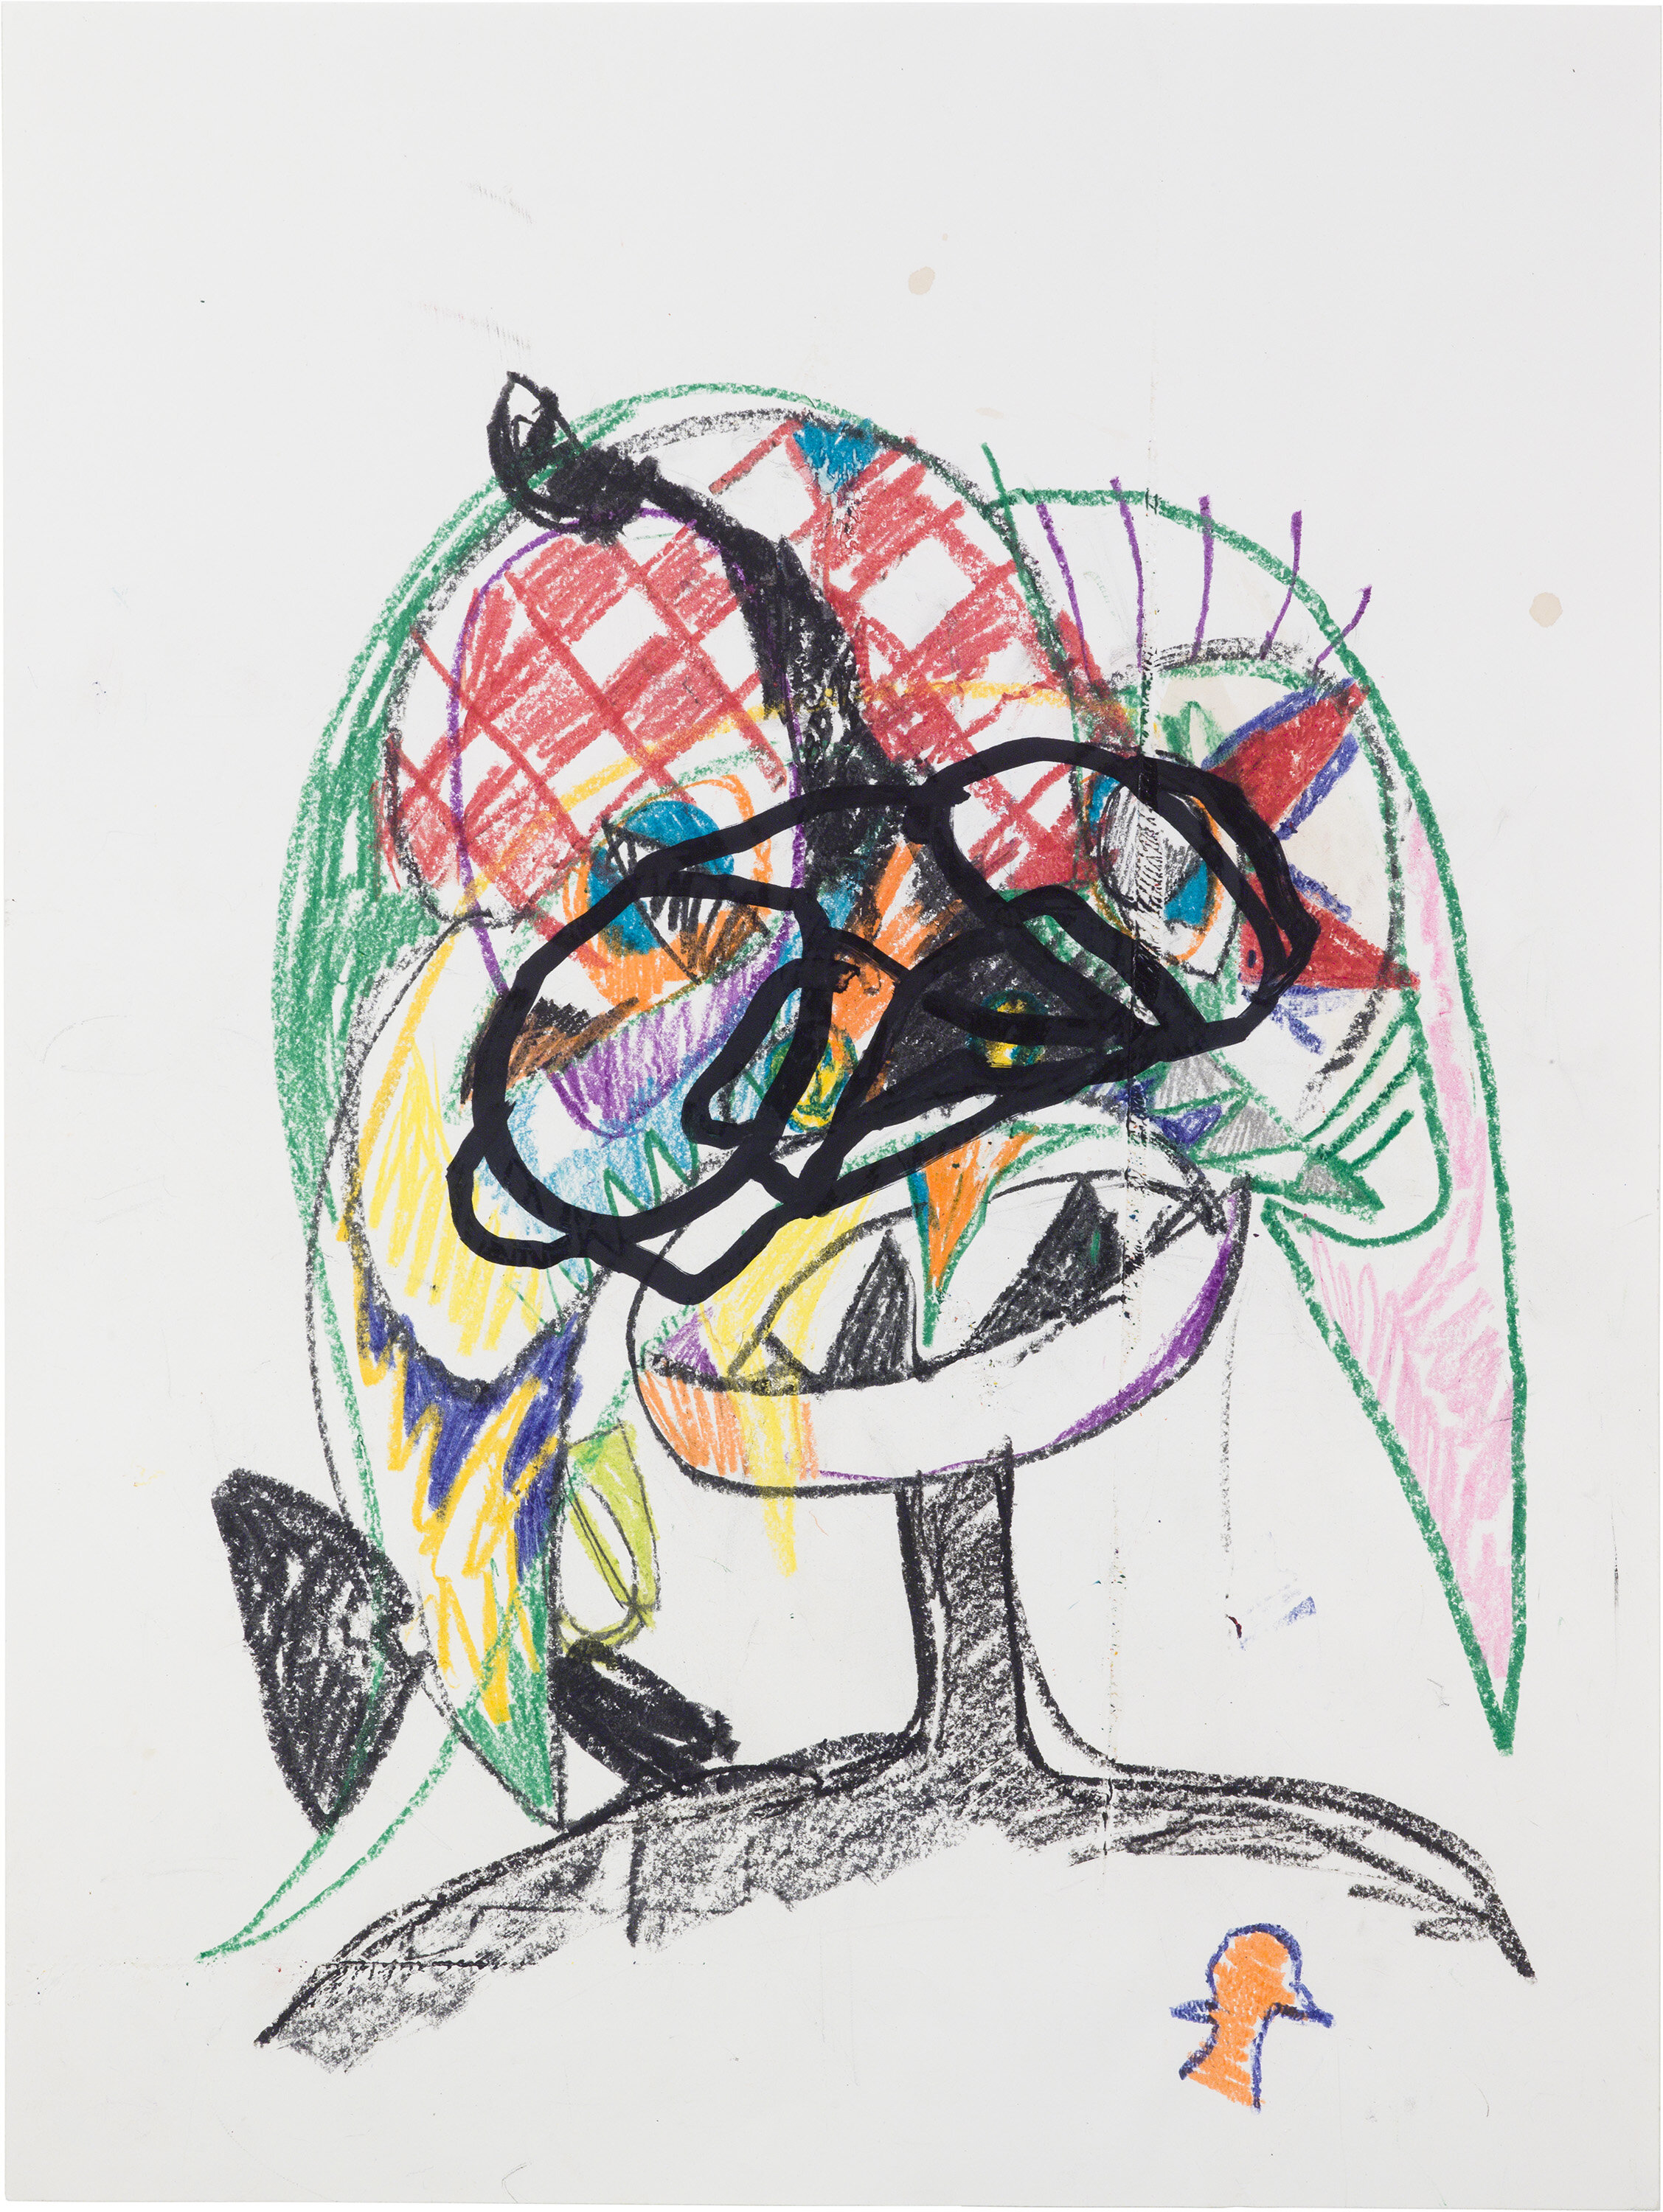  Drew Beattie and Ben Shepard   DBBS-DRW-2019-409   2019  crayon and marker on paper  24 x 18 inches 